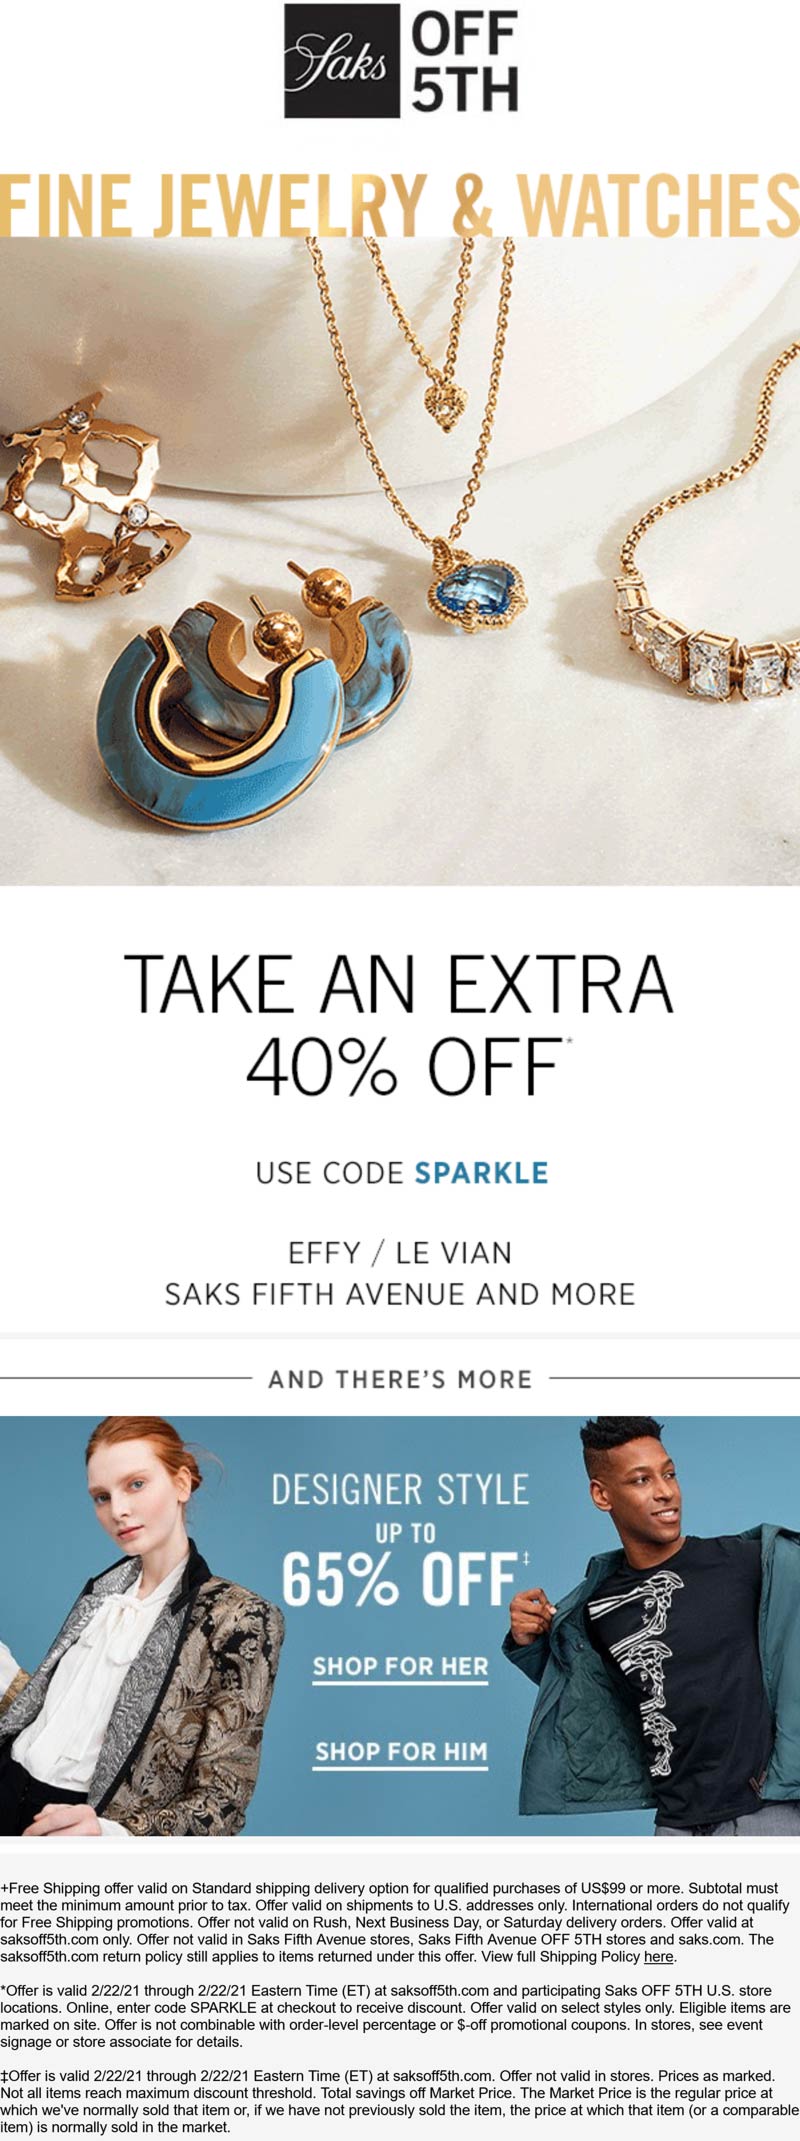 OFF 5TH stores Coupon  40% off fine jewelry & watches online today at Saks OFF 5TH via promo code SPARKLE #off5th 